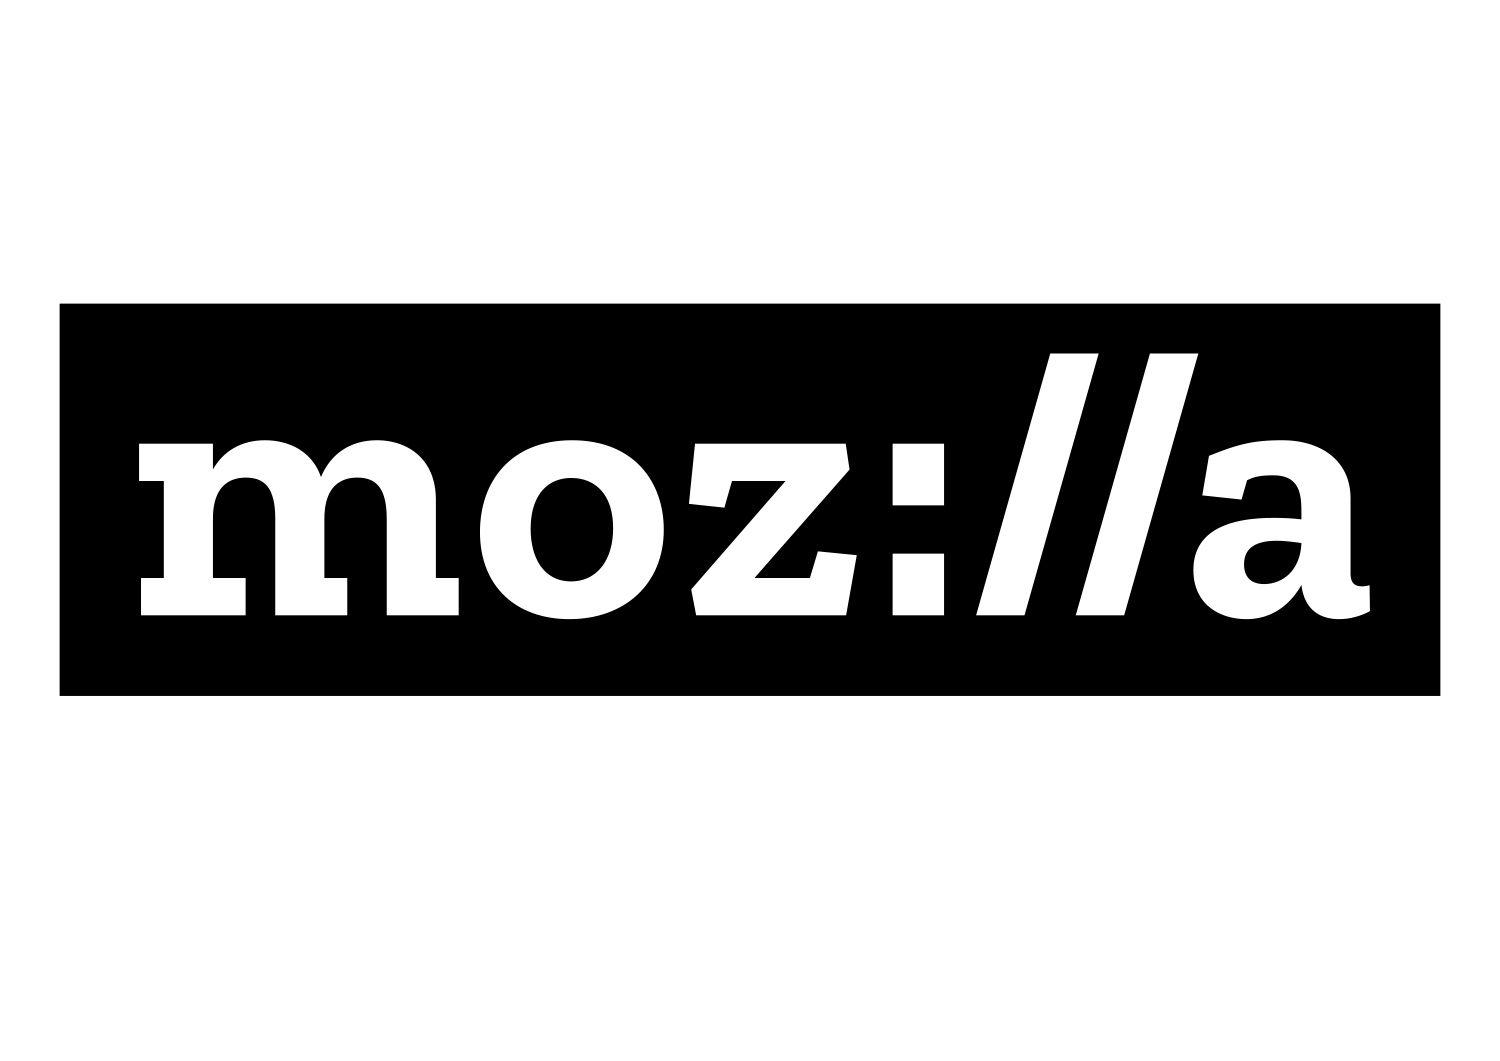 Black and White Rectangle Brand Logo - Mozilla's new logo hopes to show it's at “the heart of the internet ...